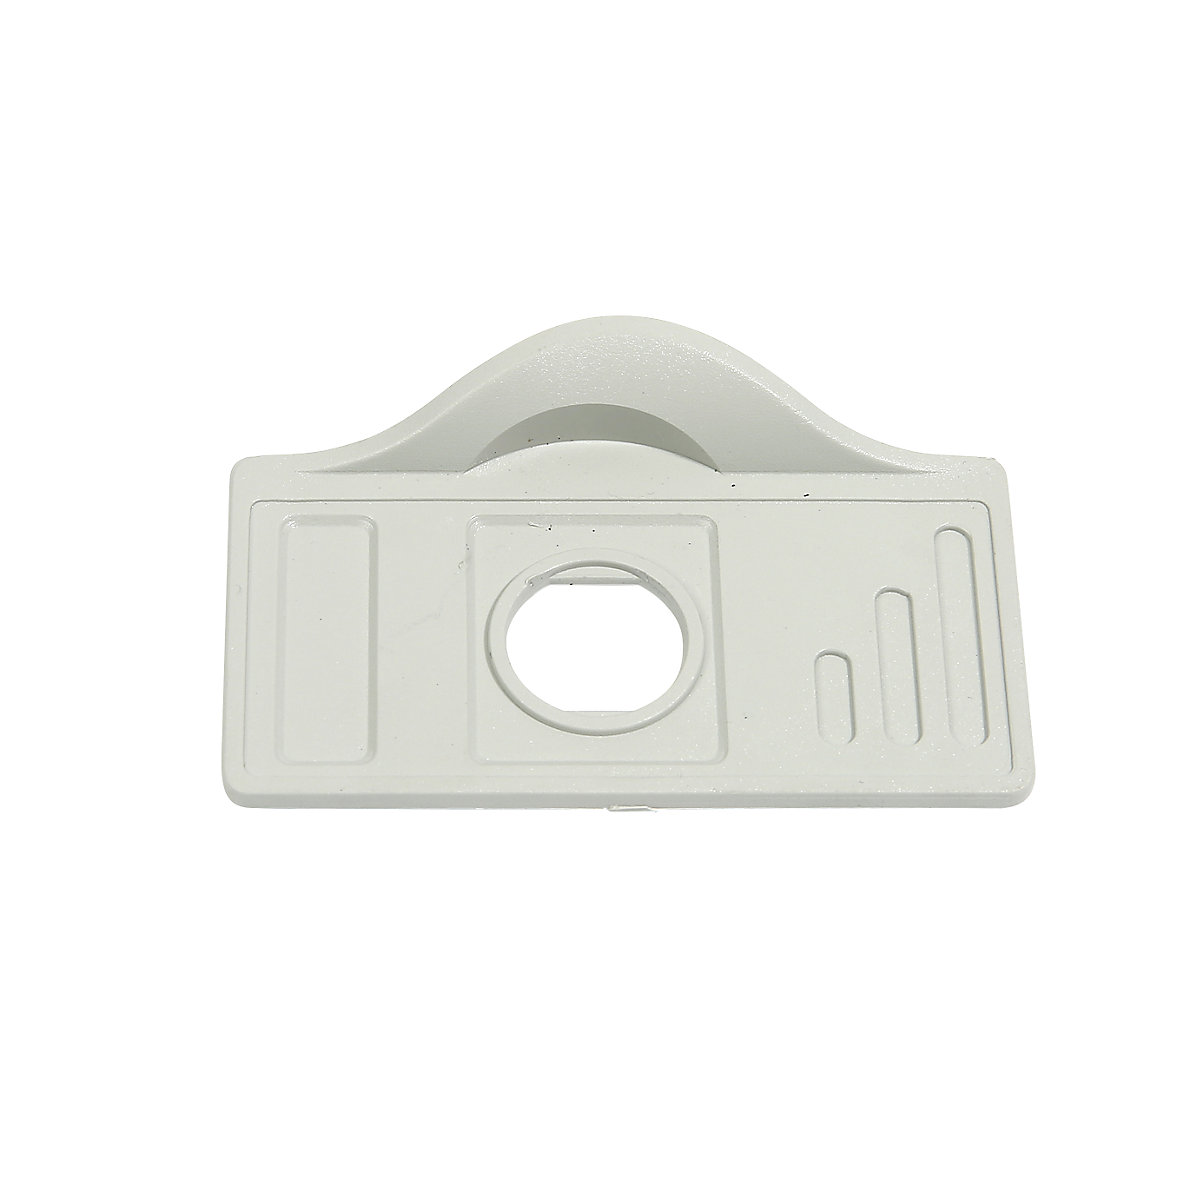 Lock cover plate